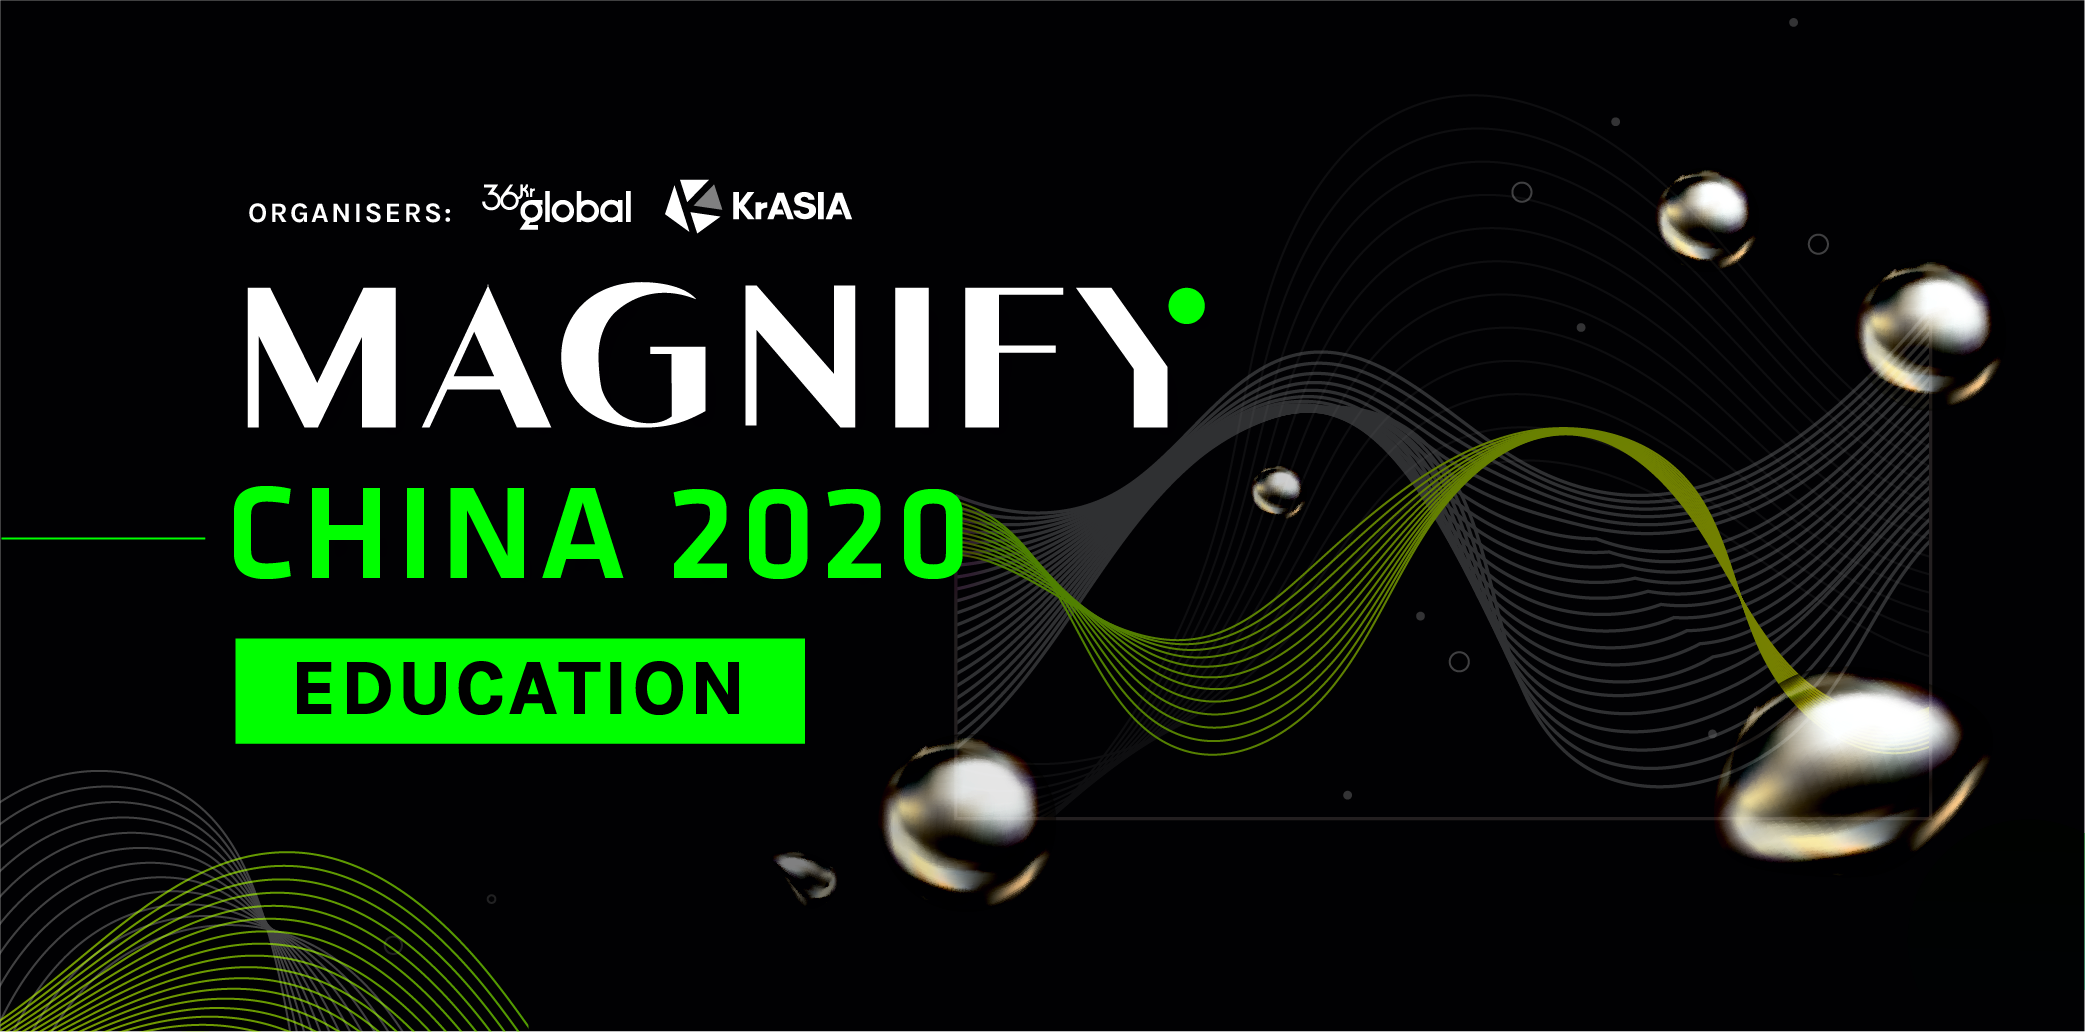 Fragmentation in the trillion-dollar Education industry may not be a bad thing | KrASIA Magnify China 2020 Recap